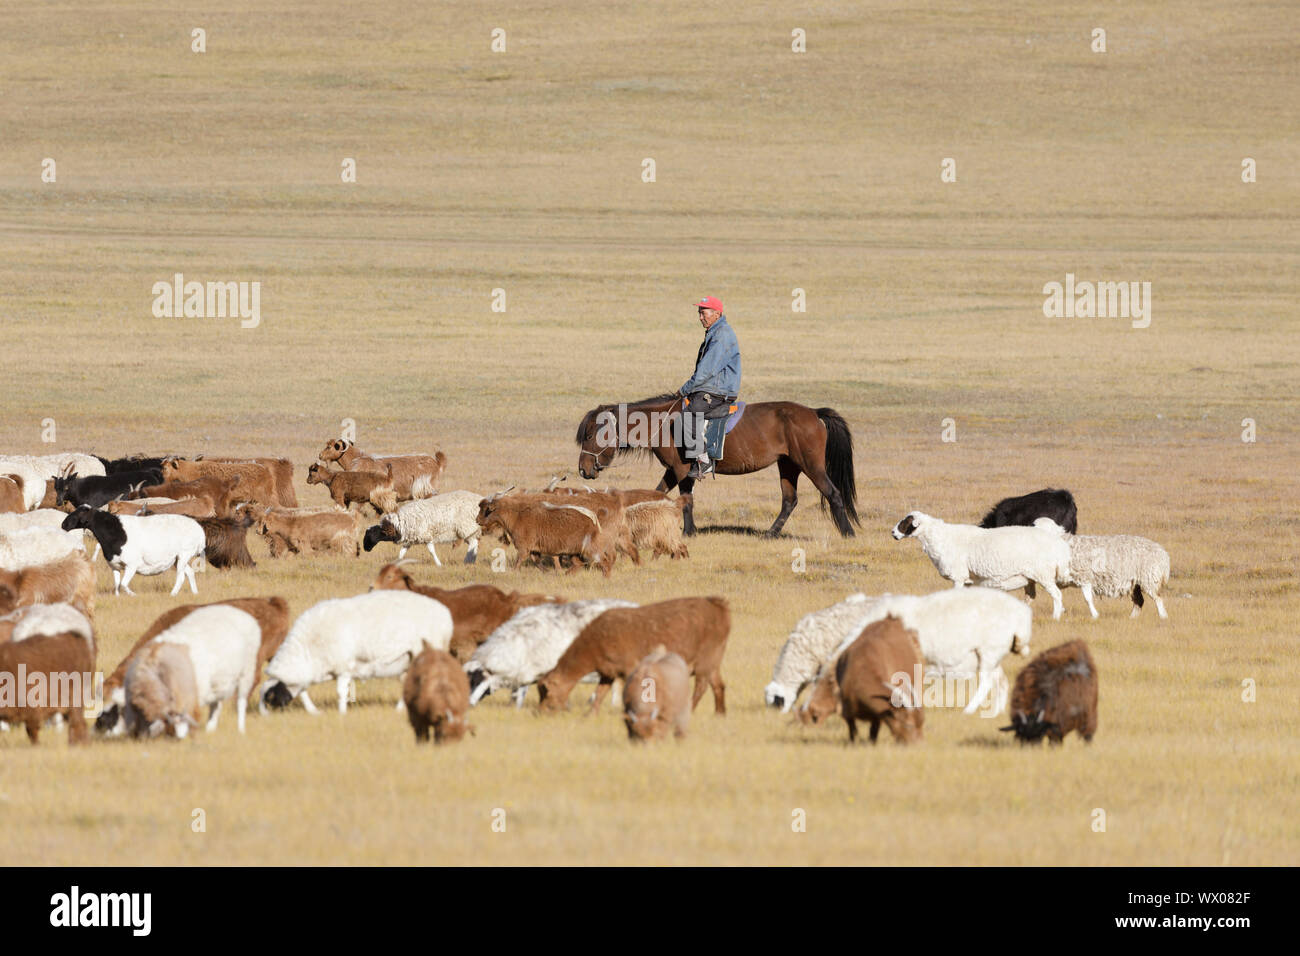 A Mongolian herder in the Steppe of Mongolia, Central Asia, Asia Stock Photo